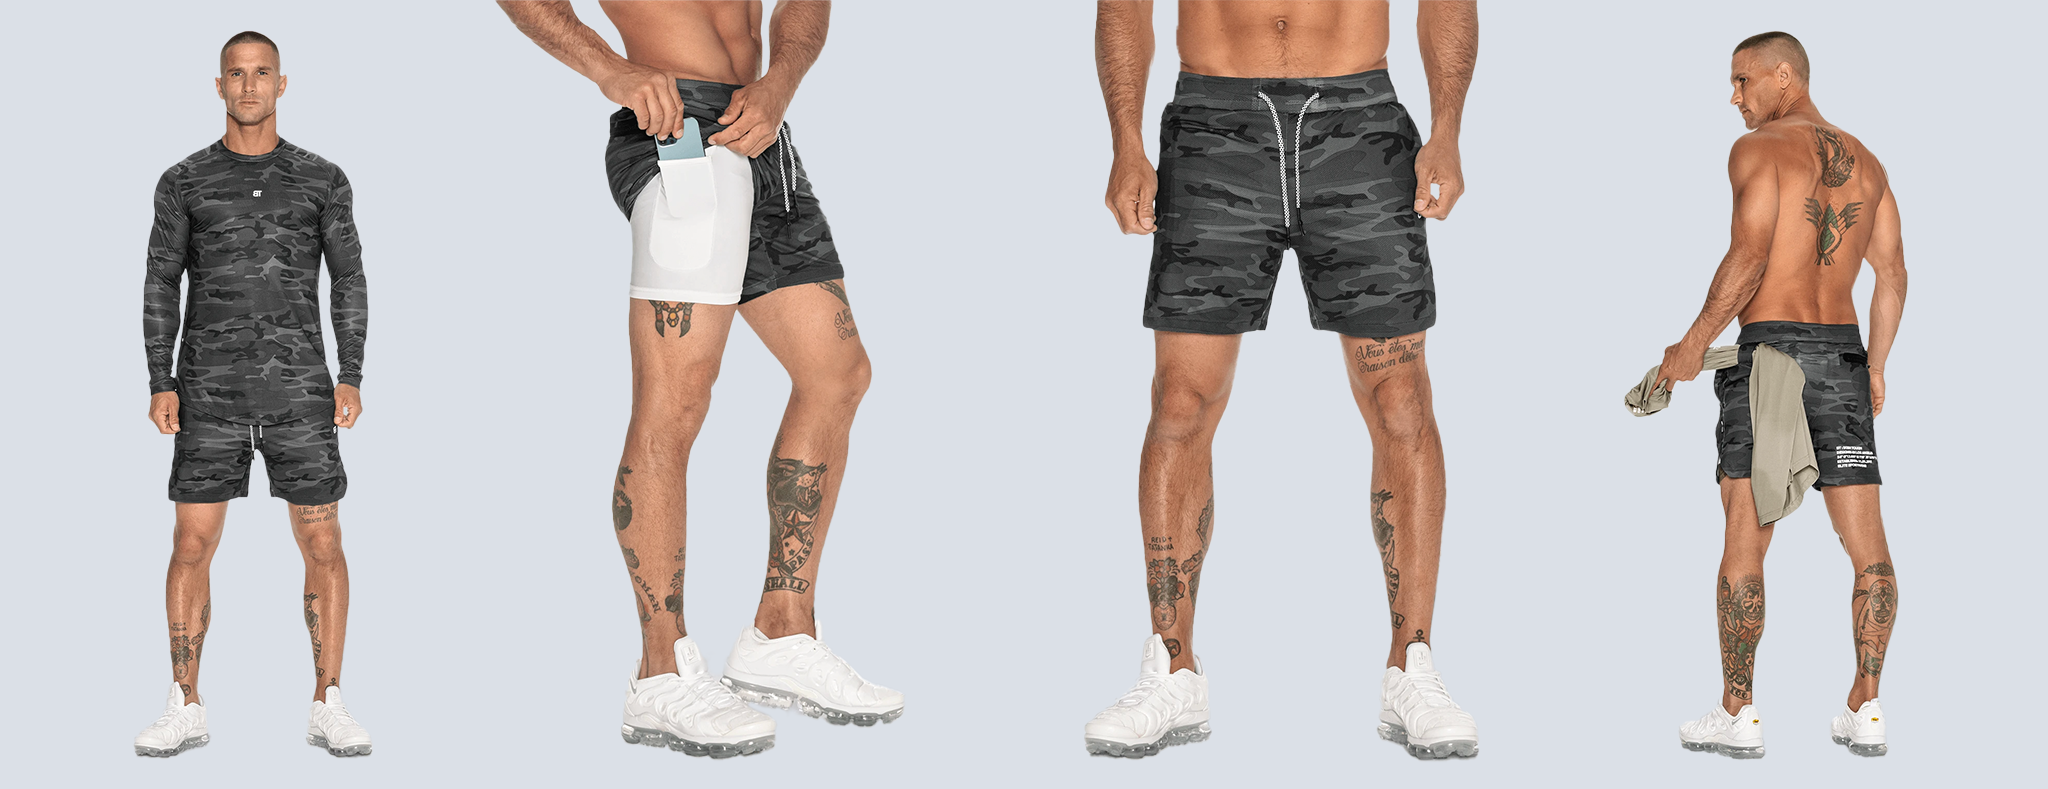 Air Pro 7 inch liner bodybuilding shorts